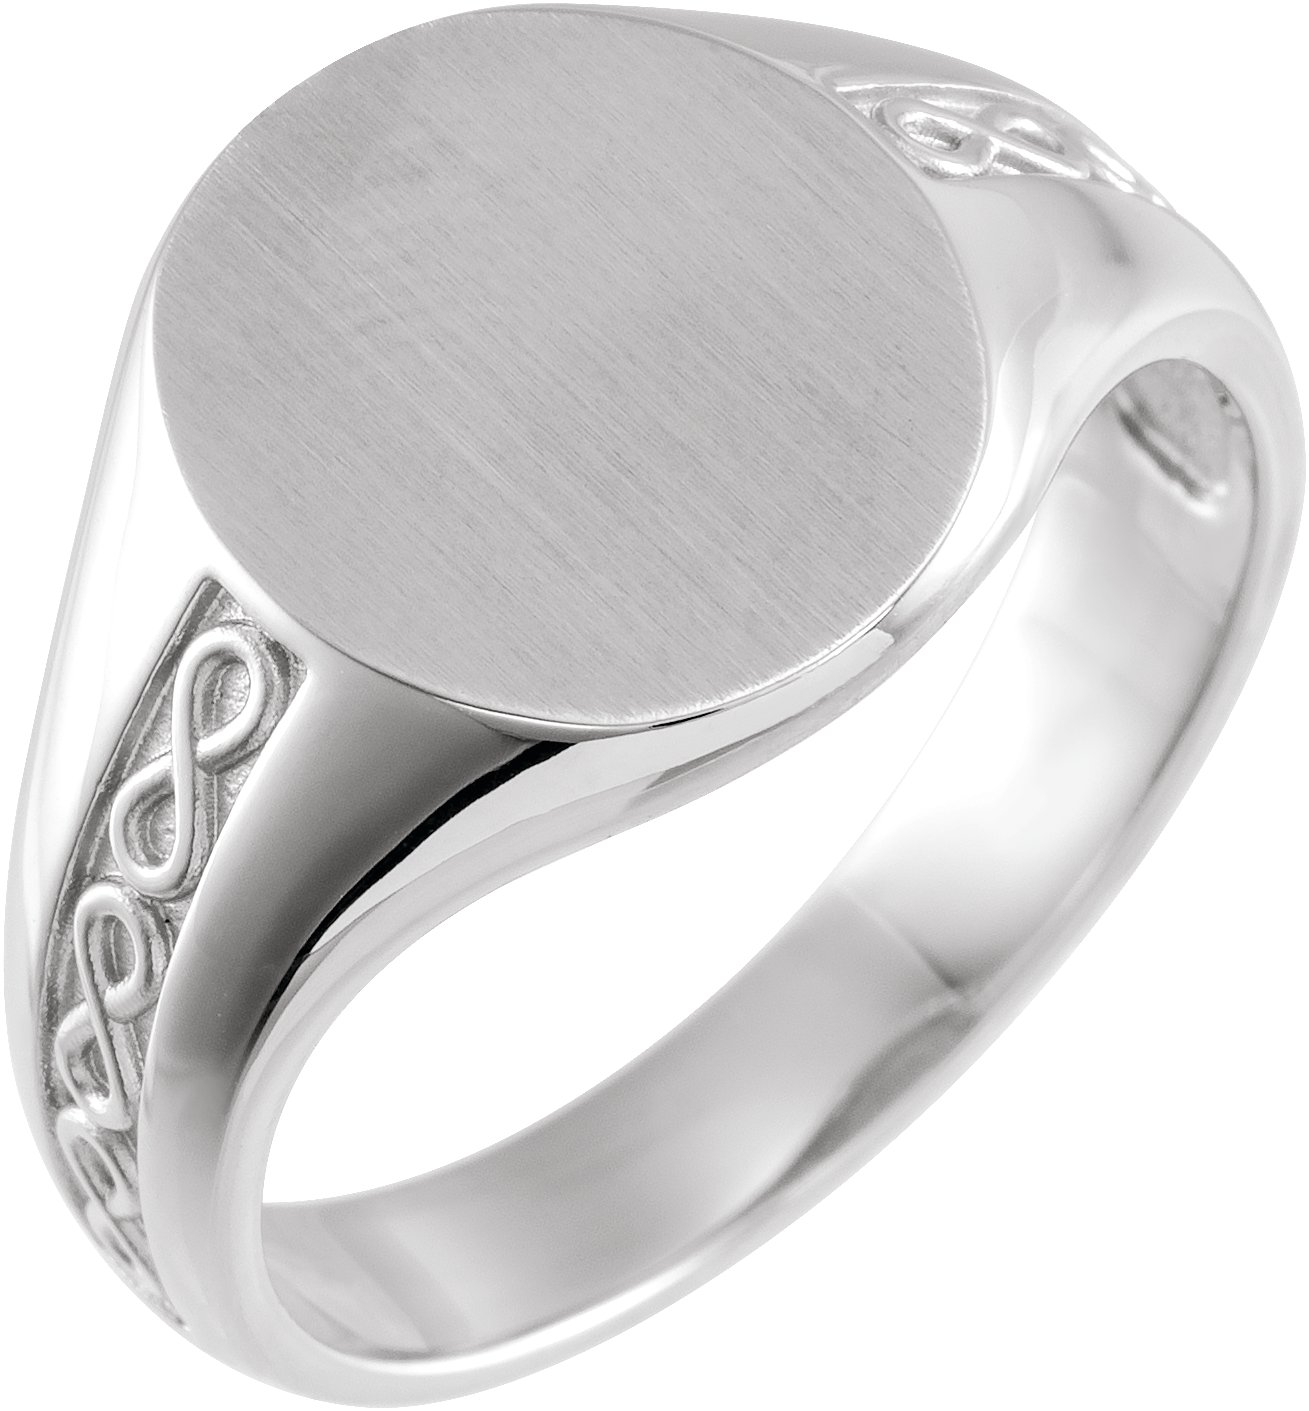 Sterling Silver 15.3x13 mm Brushed Finished Signet Ring